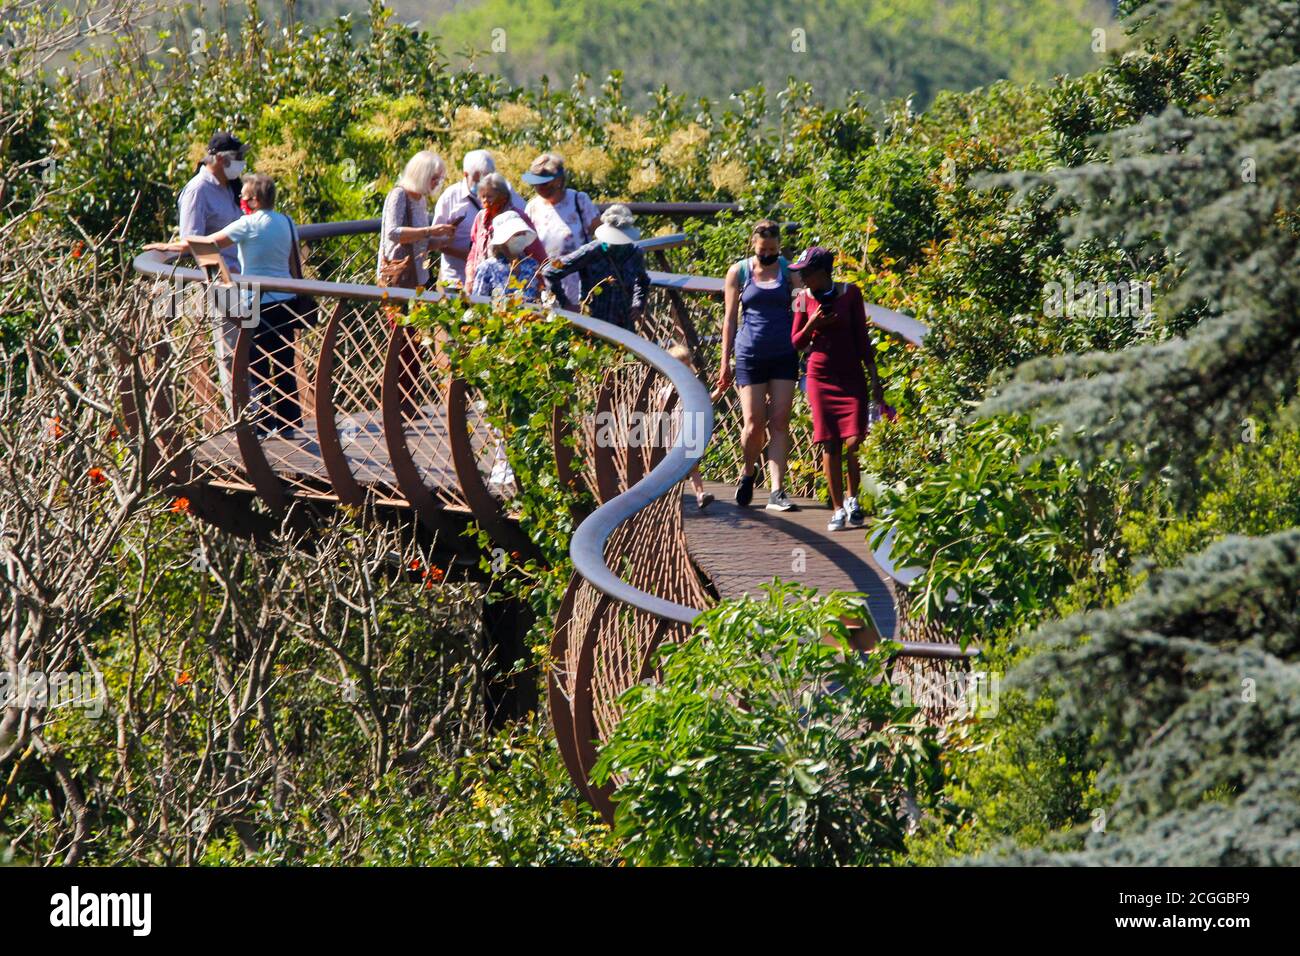 This is a foreshortened view of the aerial walkway in Kirstenbosch National Botanical Garden in Cape Town. The visitors are all wearing face-masks. Stock Photo